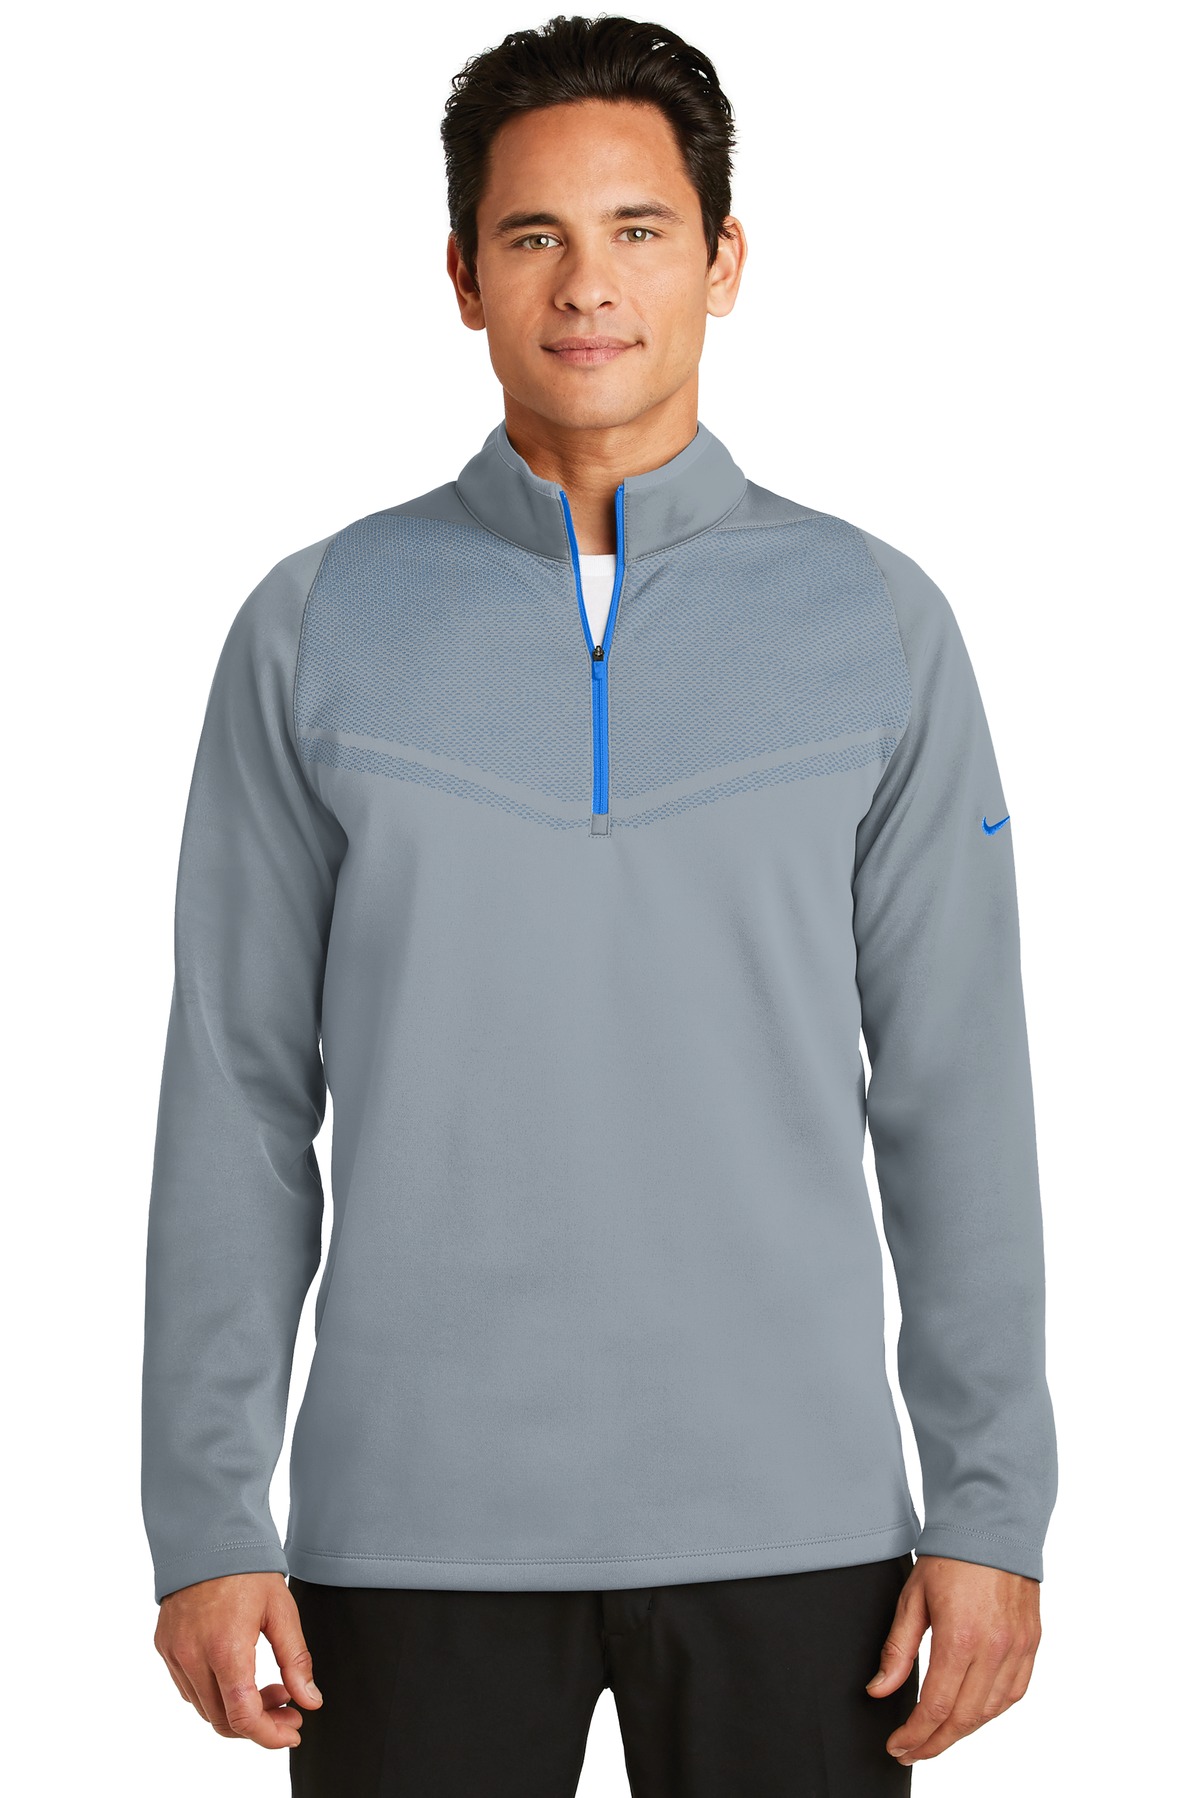 Nike Therma-FIT Hypervis 1/2-Zip Cover-Up. 779803